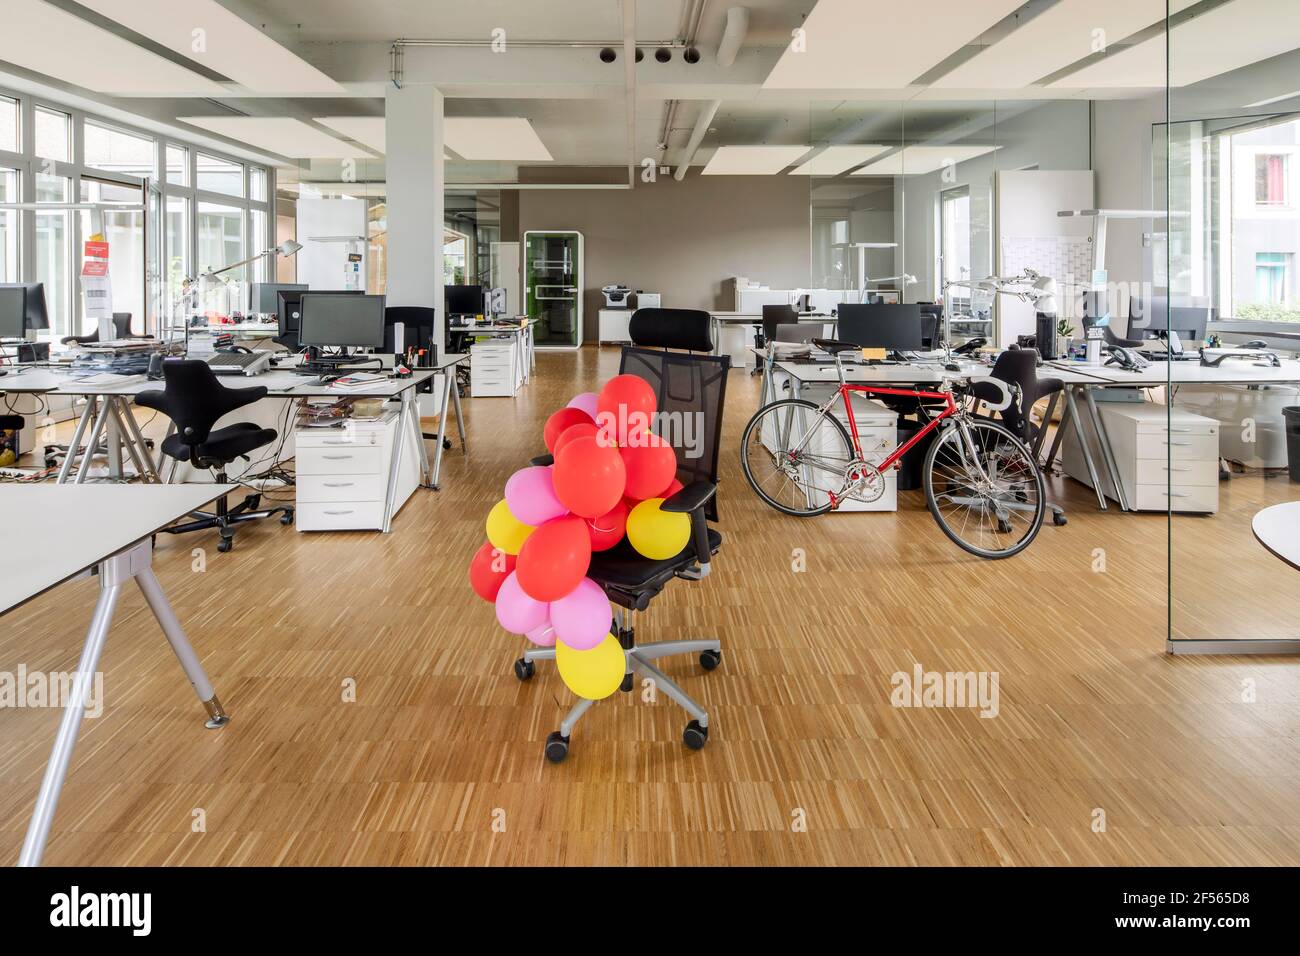 Bunch of balloons on chair in open plan office Stock Photo